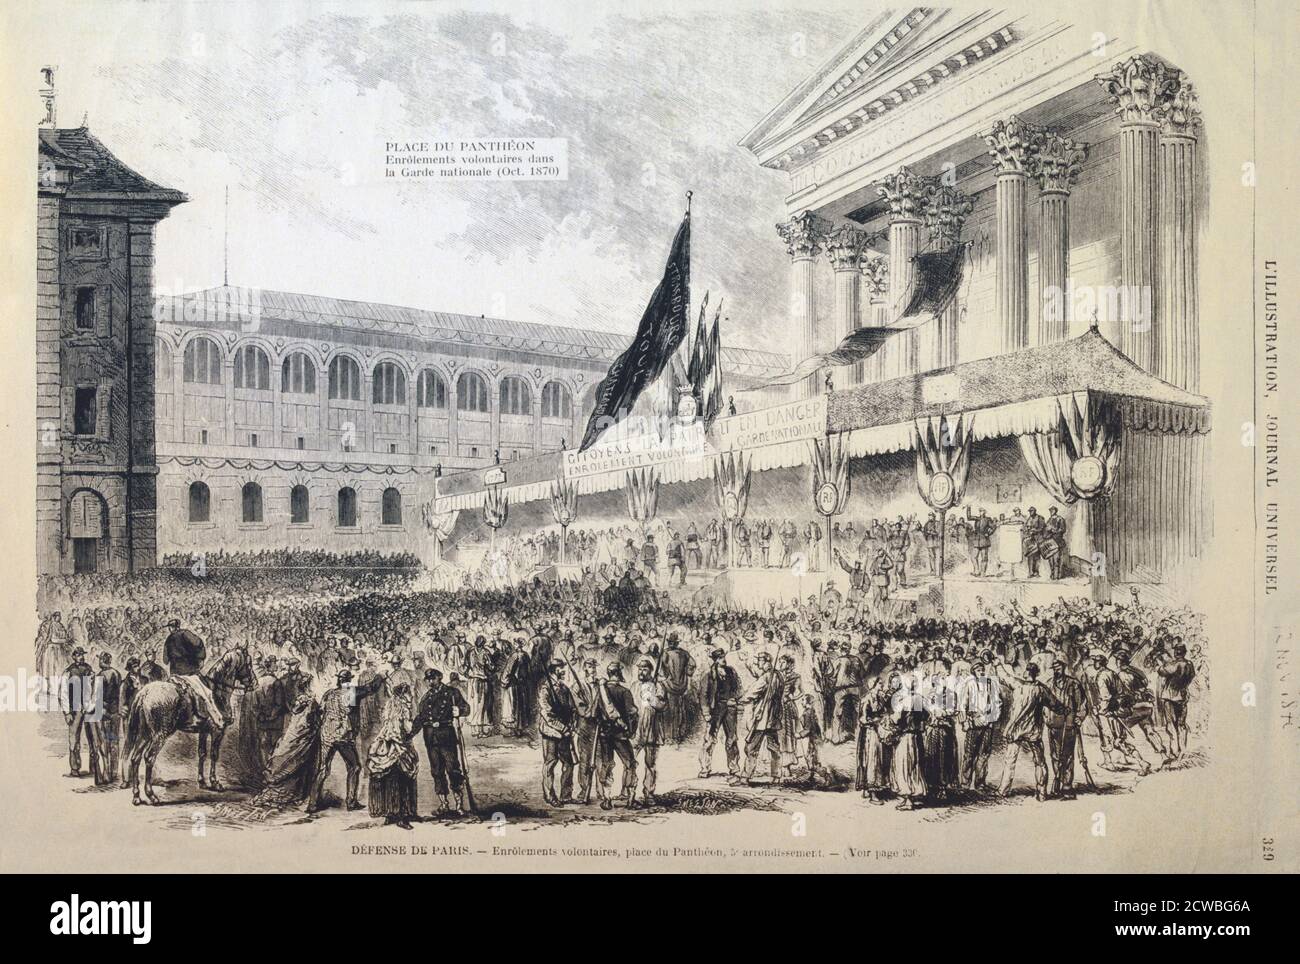 Enlistment of Volunteers into the National Guard, Place du Pantheon, Paris, 1870-1871. Volunteers thronging to enlist to fight in the Franco-Prussian War. Print from L'Illustre. From a private collection. Stock Photo